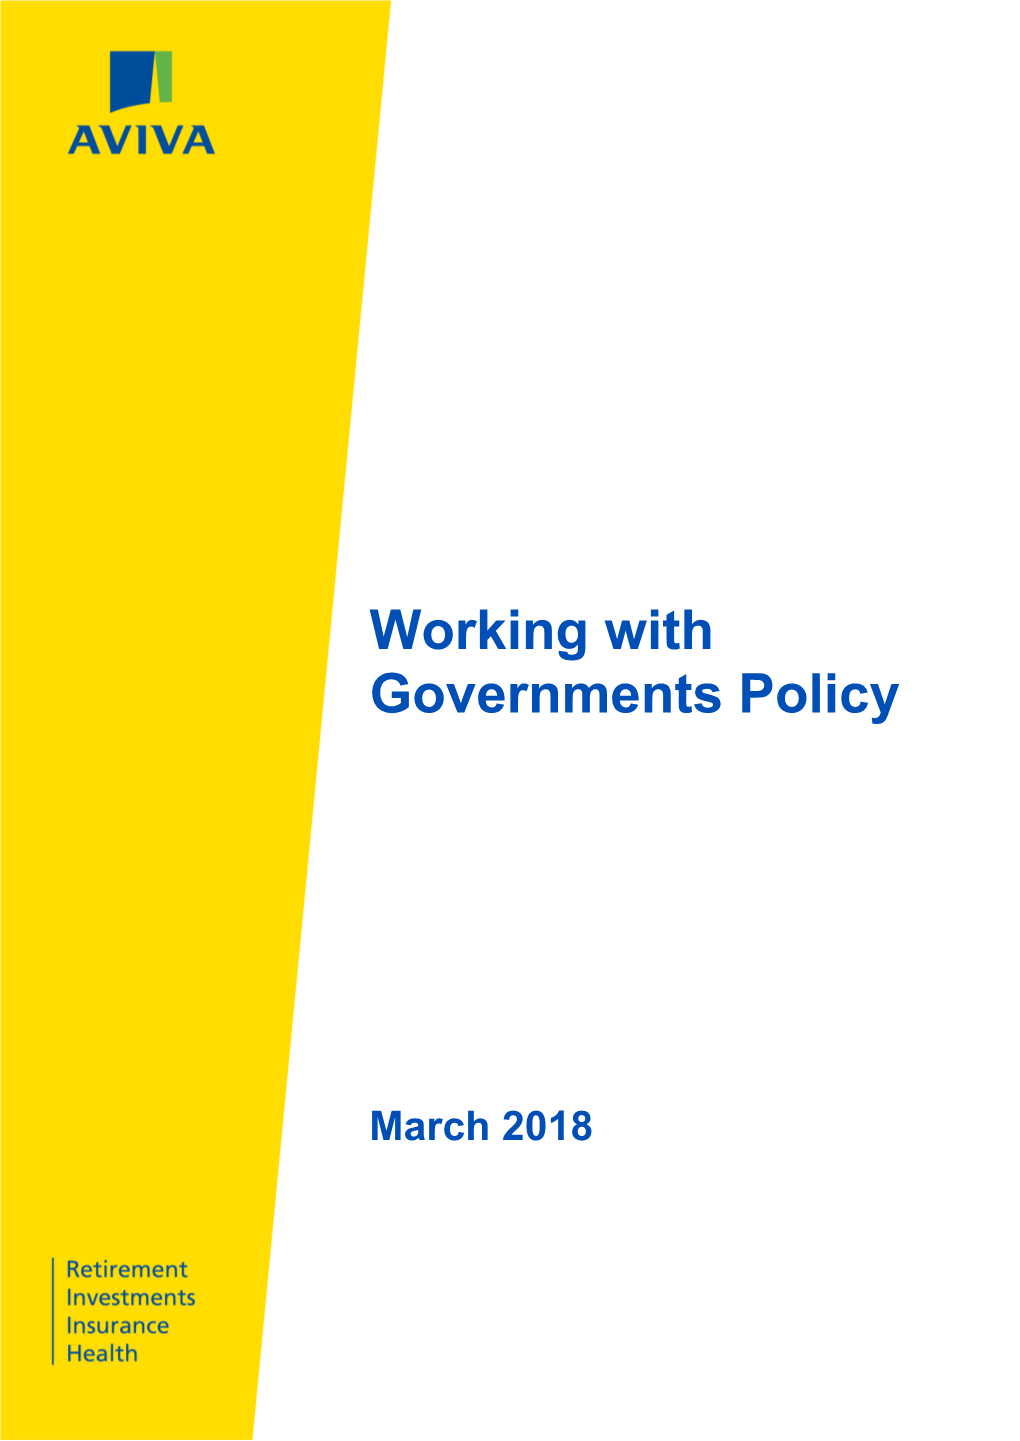 Working with Governments Policy 2018